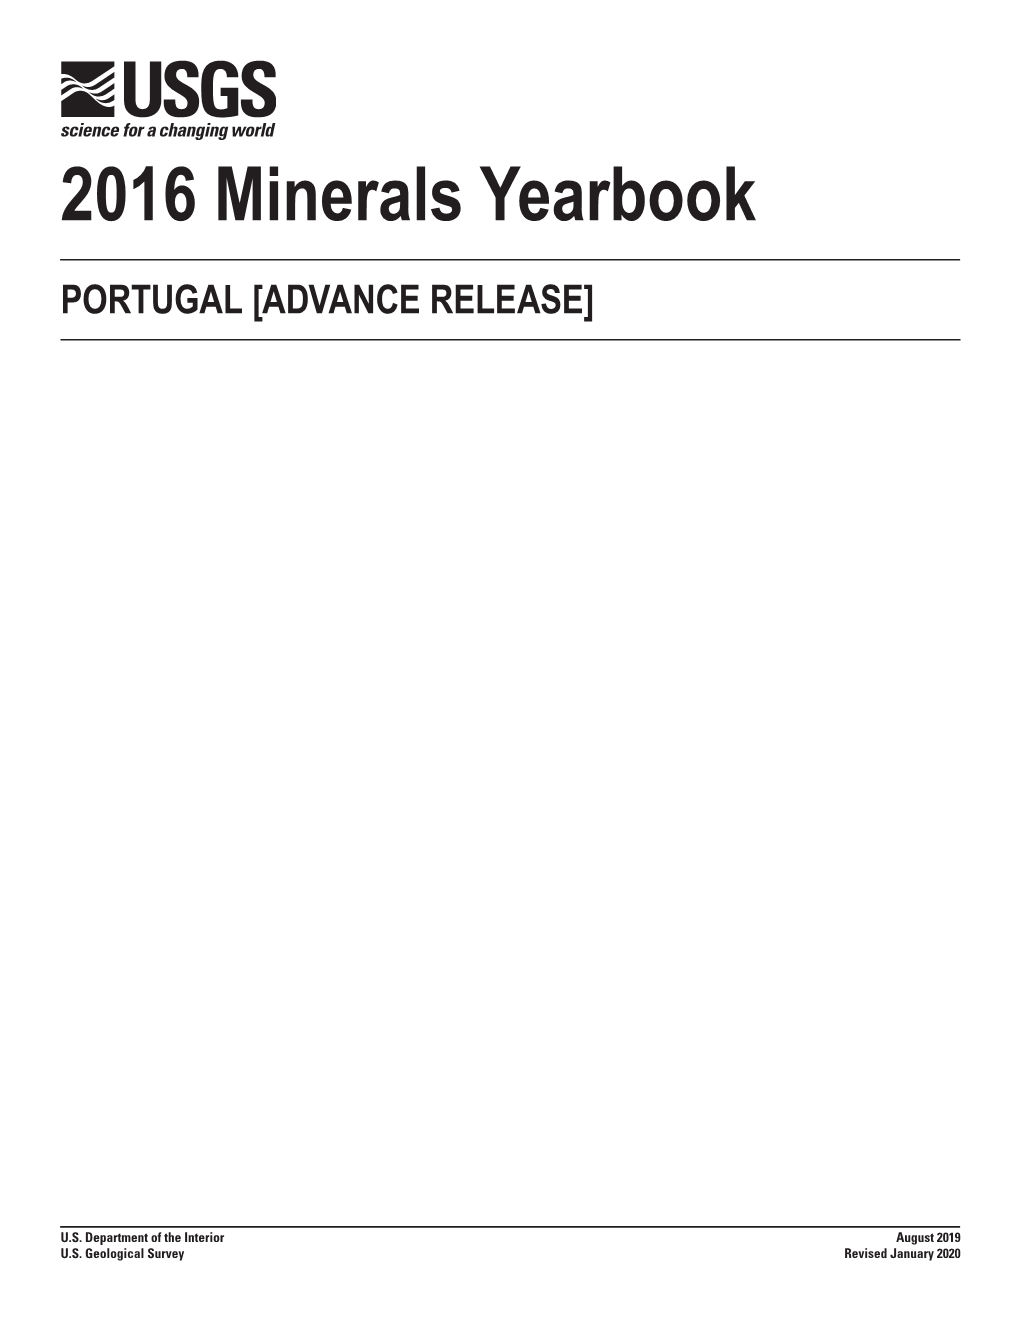 The Mineral Industry of Portugal in 2016